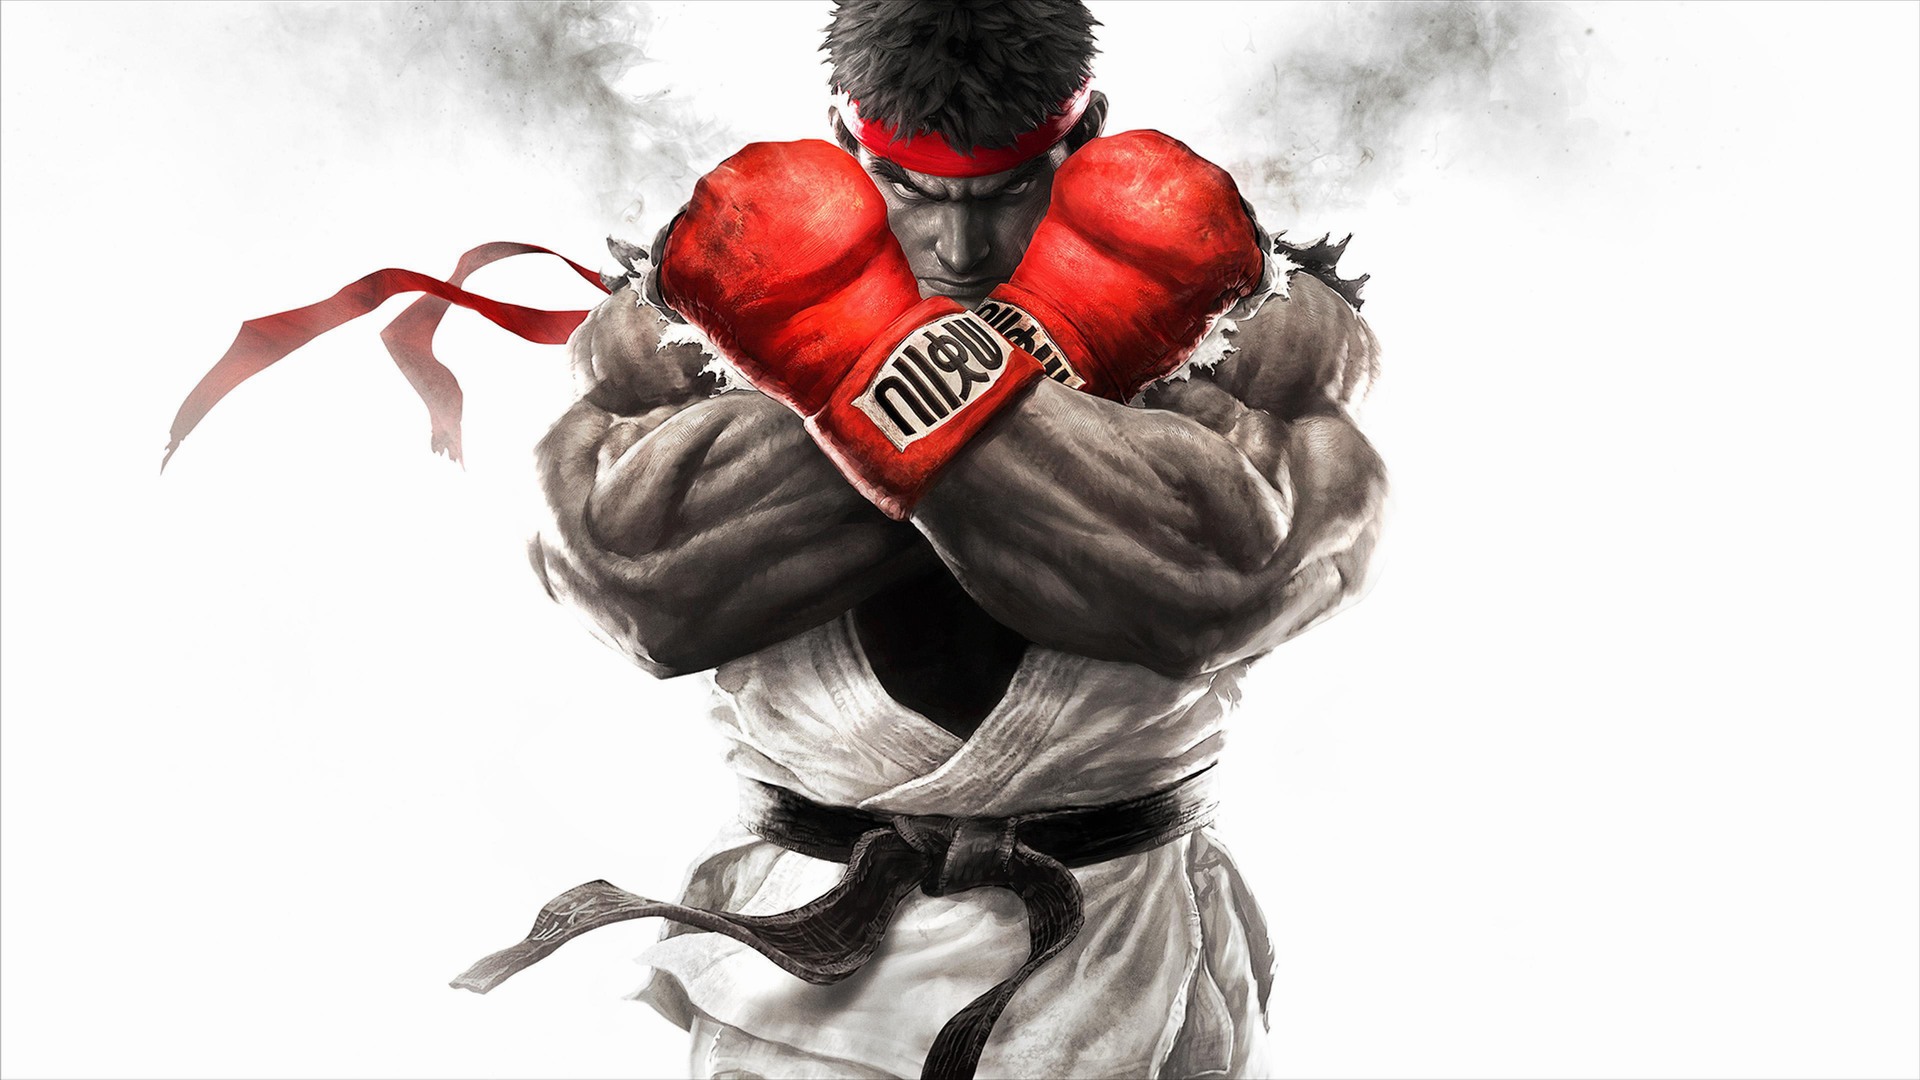 Street Fighter 5 PC Benchmark Tool is now available for download